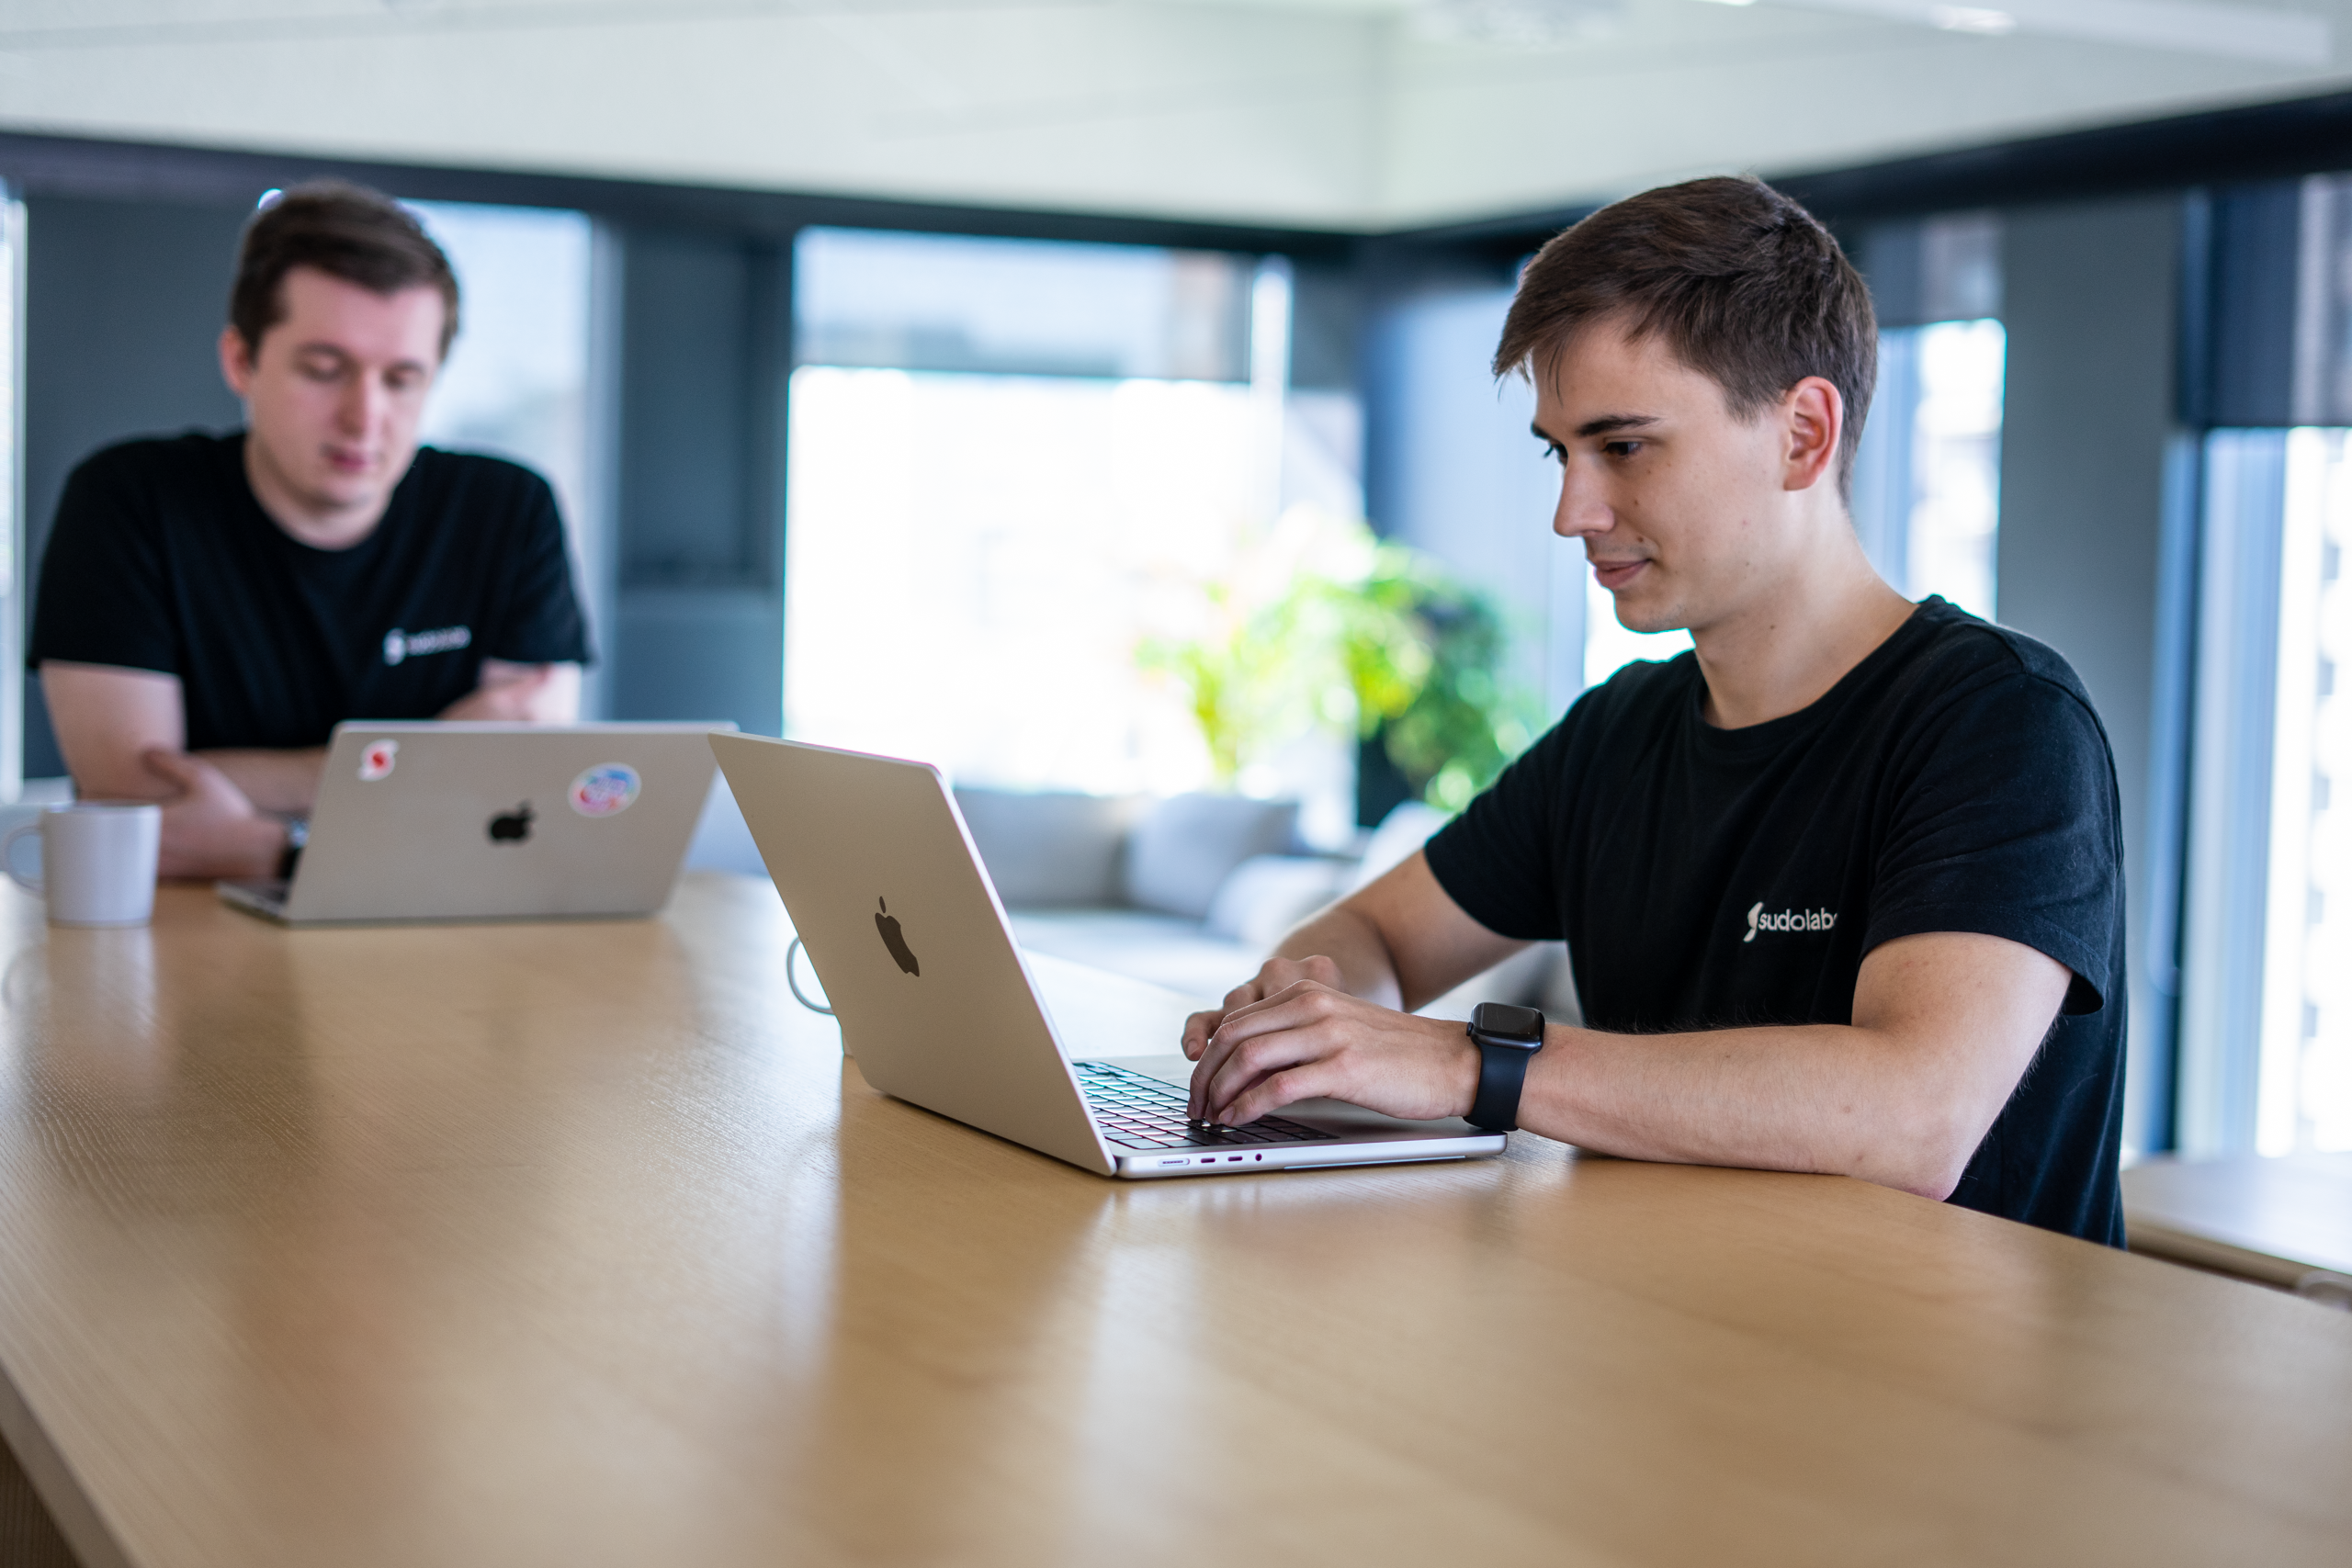 Erik Kandalík and Tomas Kuchárik, data scientists, engaged in a collaborative work session in our kitchen's common area. Their teamwork extends beyond traditional workspaces.